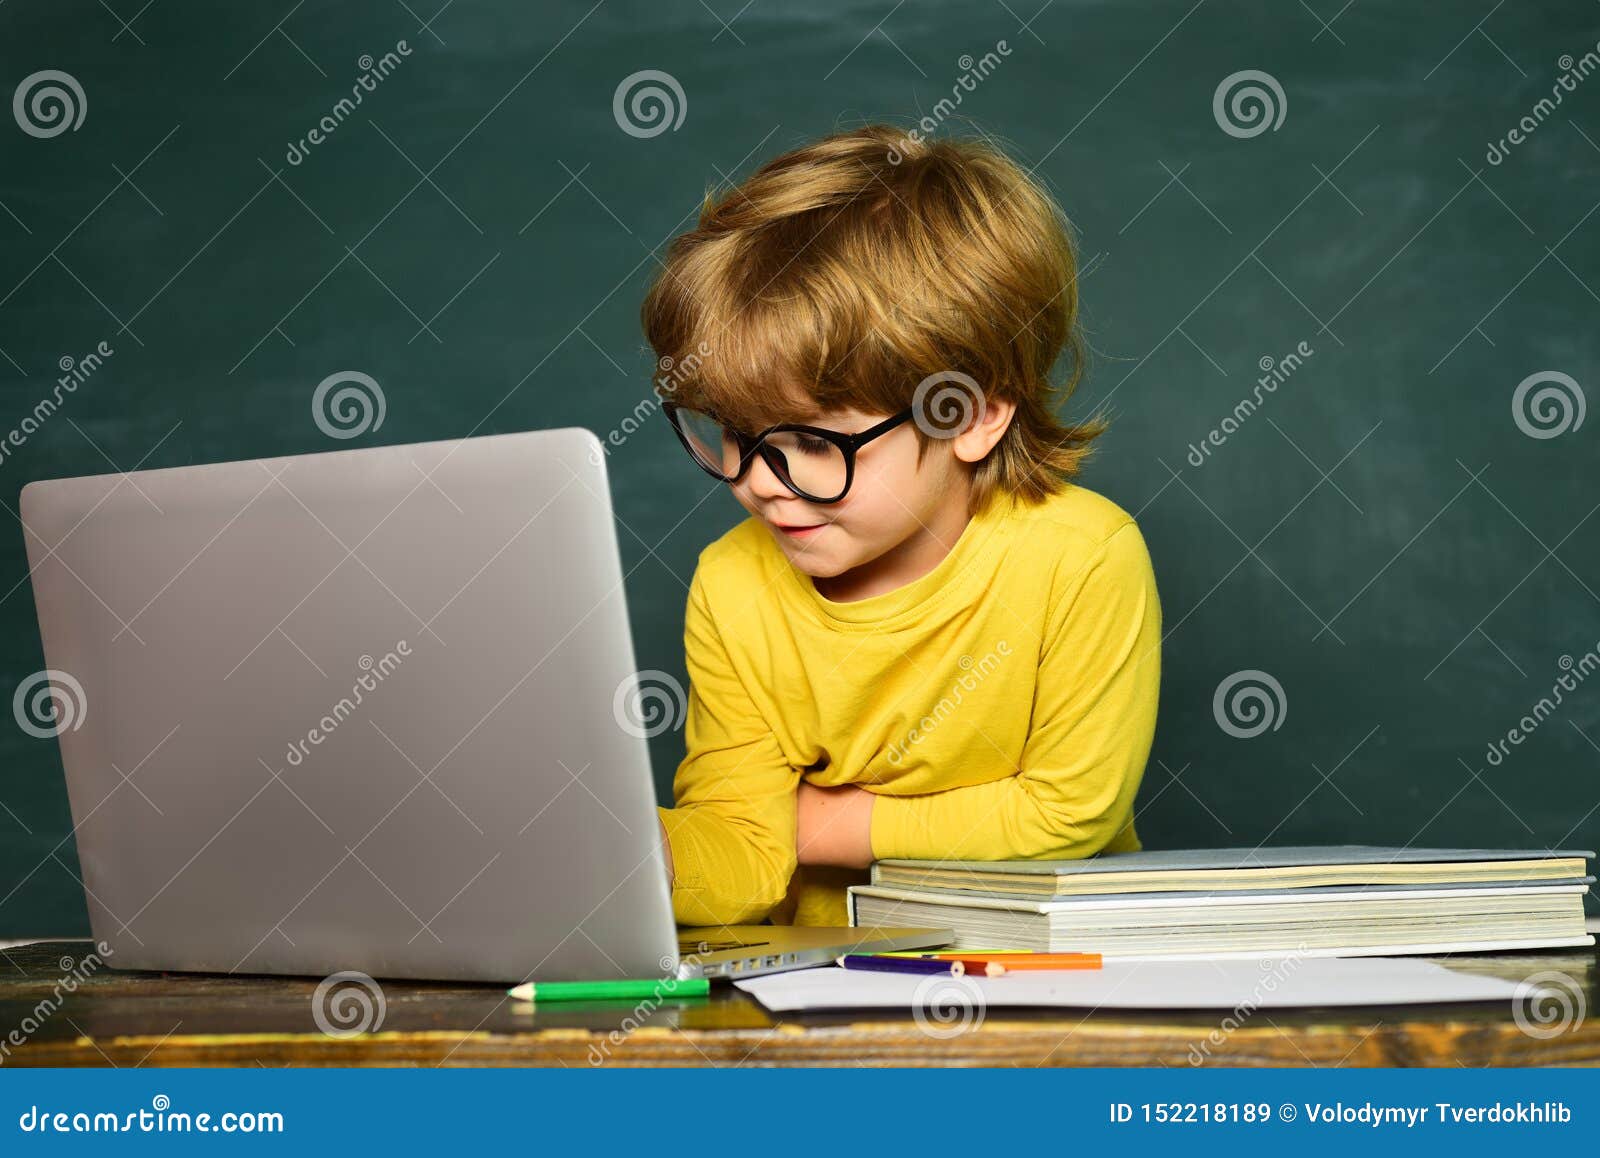 Great Study Achievement. Classroom. Blackboard Background - Copy Space.  Happy Smiling Pupils Drawing at the Desk. Stock Image - Image of helping,  leadership: 152218189